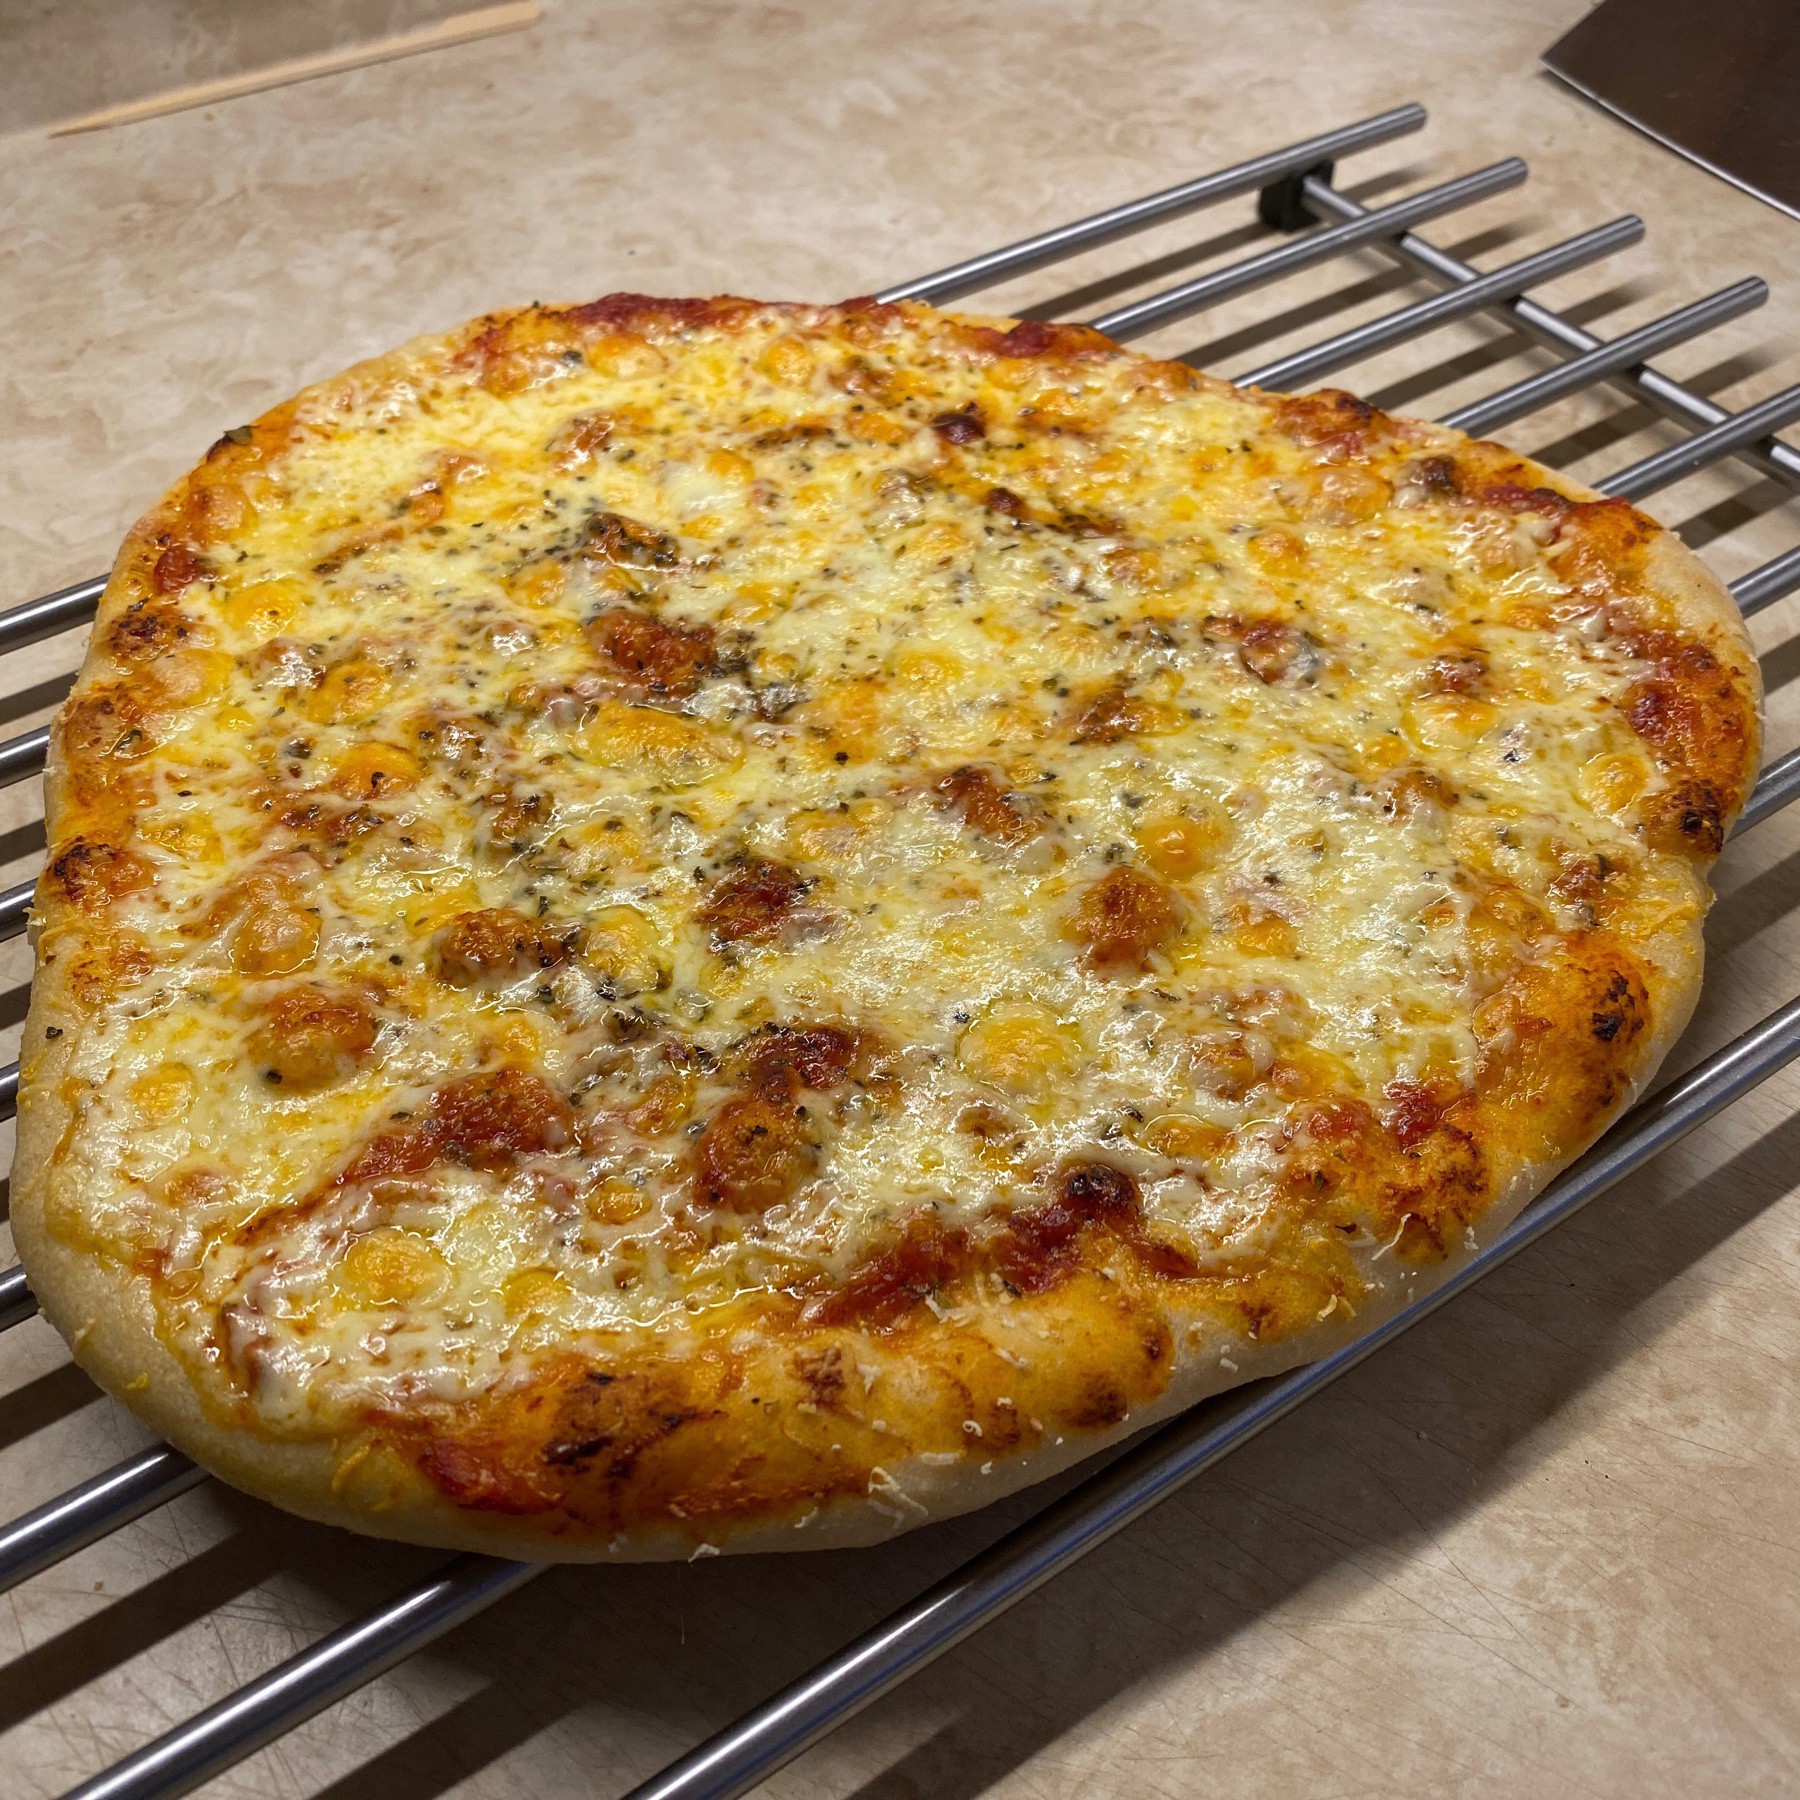 Cheese pizza cooling on rack.